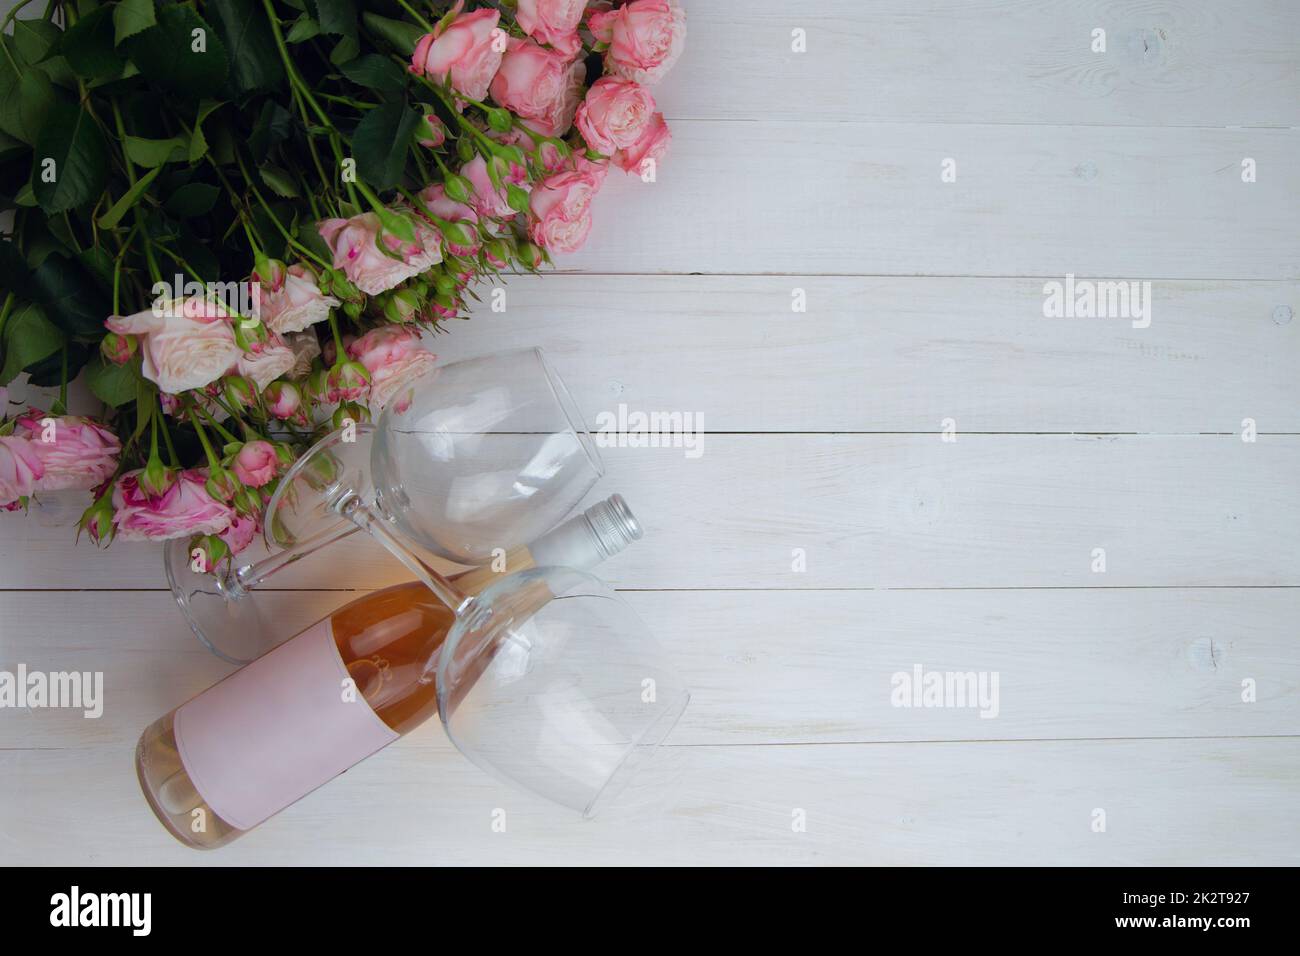 A large bouquet of pink roses and a bottle of rose wine with glasses lie on the side on a wooden white background with a place for text Stock Photo